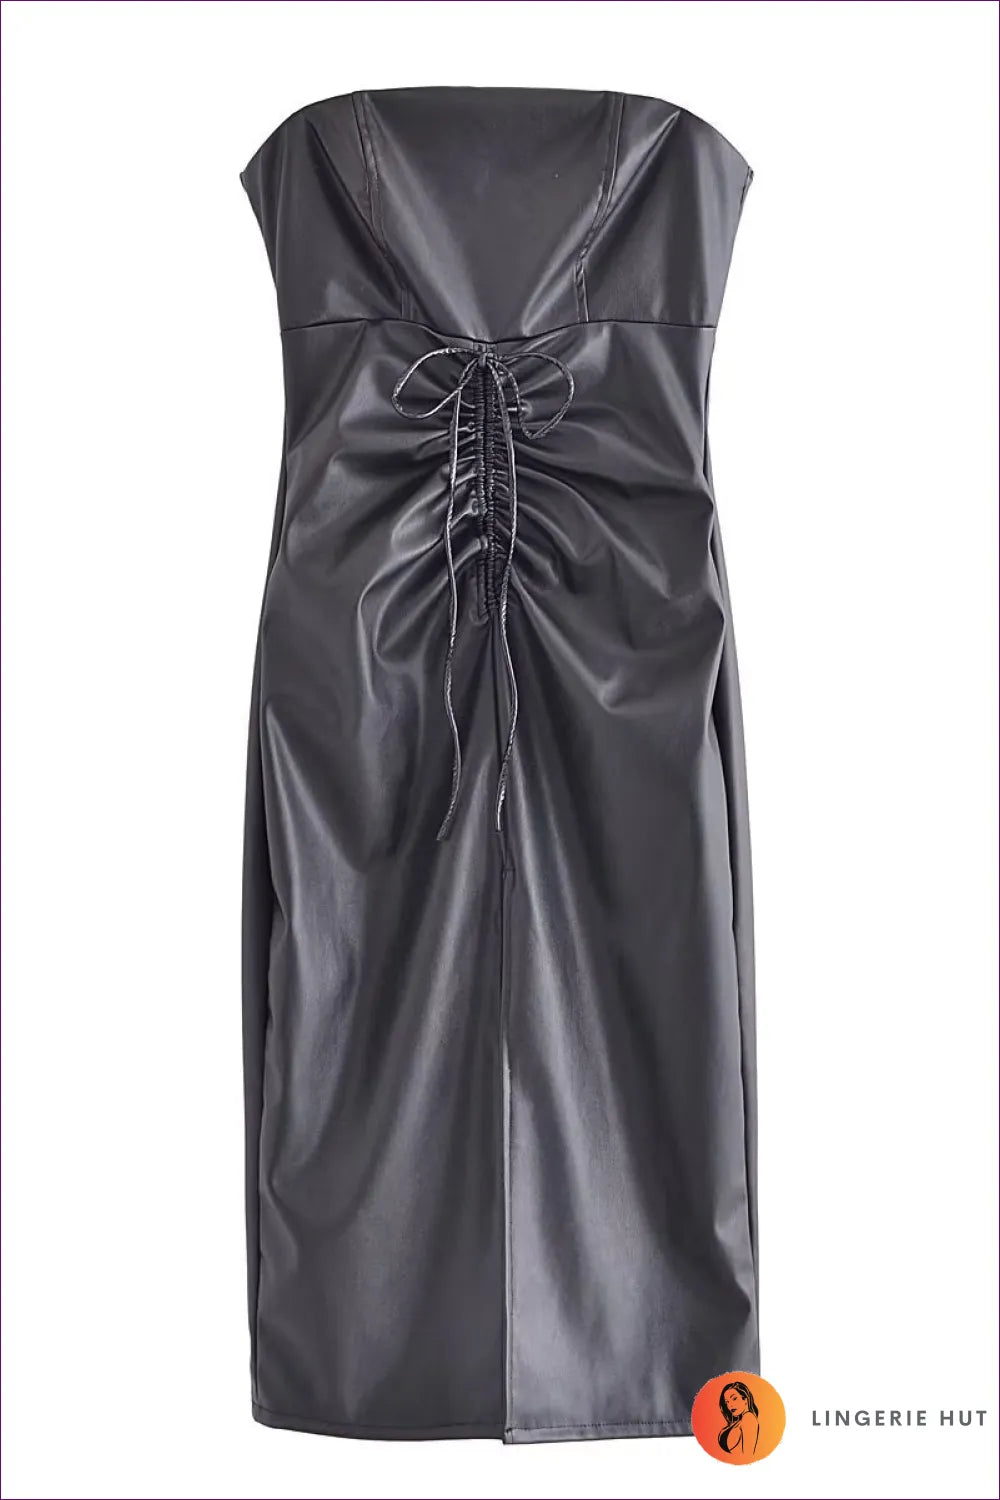 Make a Statement At Your Next Event With Lingerie Hut’s Strapless Ruched Midi Dress. Sleek Faux Leather